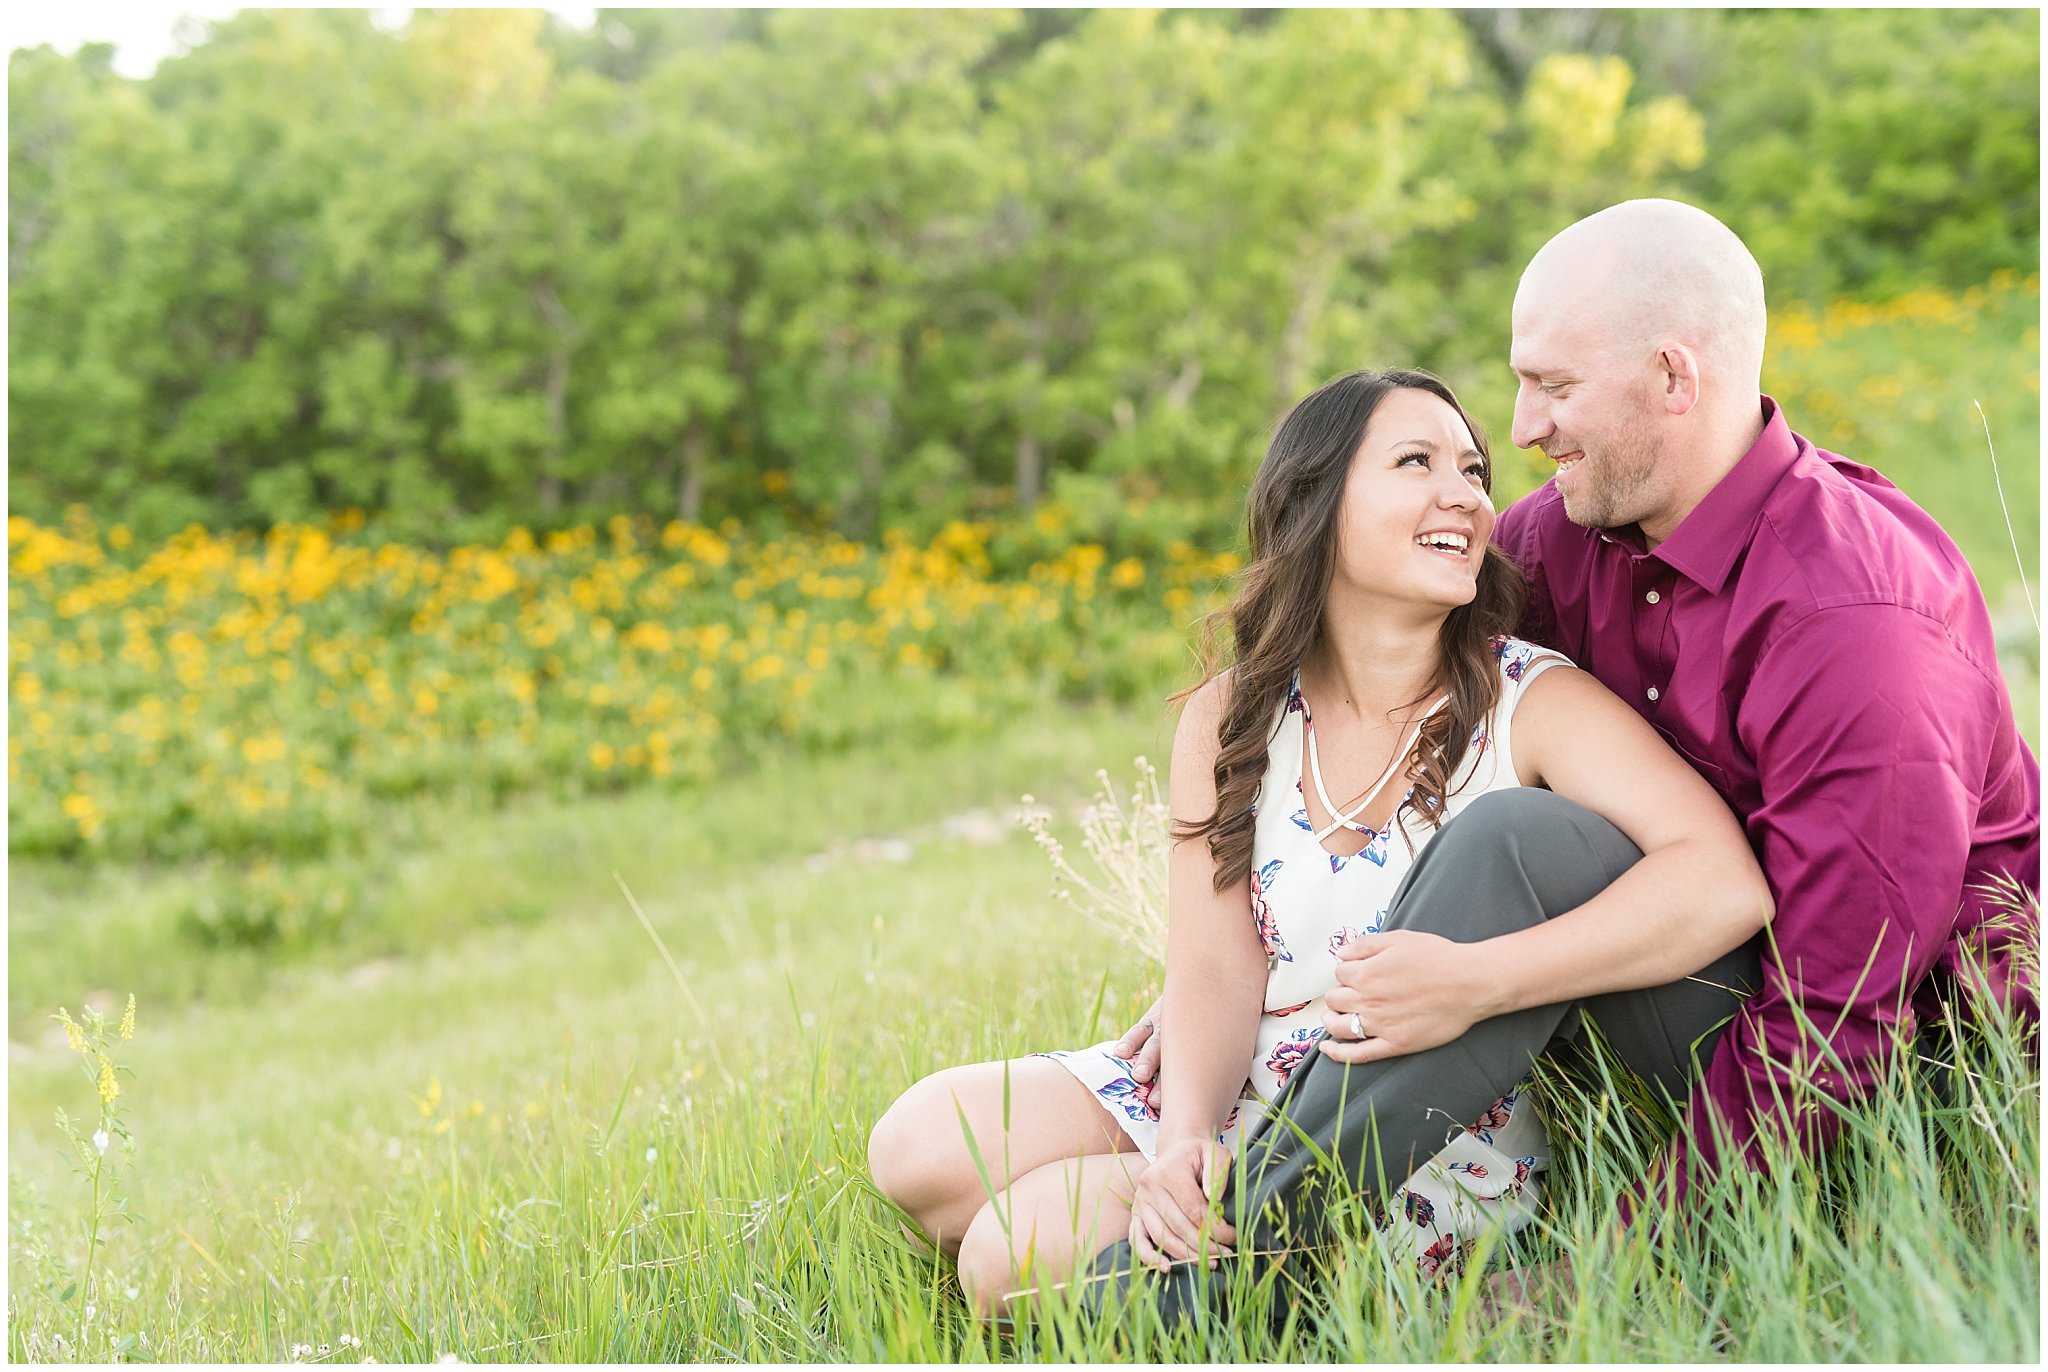 Happy couple engagement session with mountains in the background and wildflowers | Snowbasin Utah Engagements